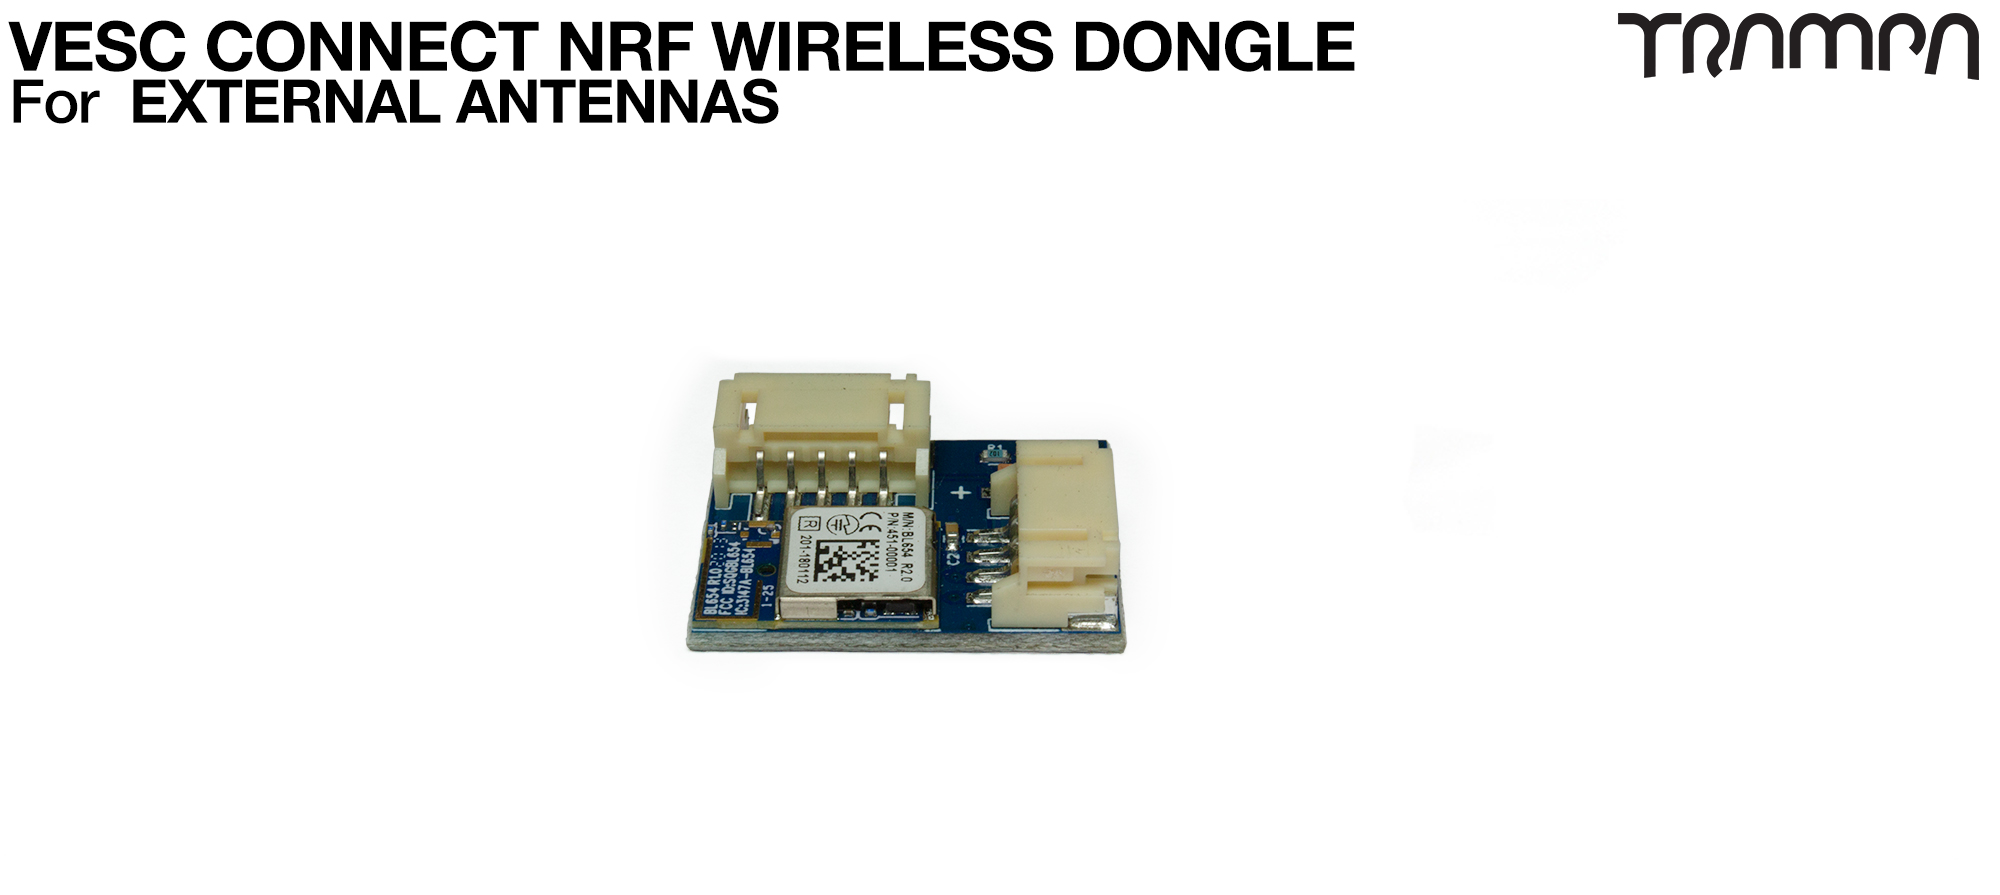 VESC NRF Connect with EXTERNAL ARIAL Antenna (+£35) - OUT OF STOCK